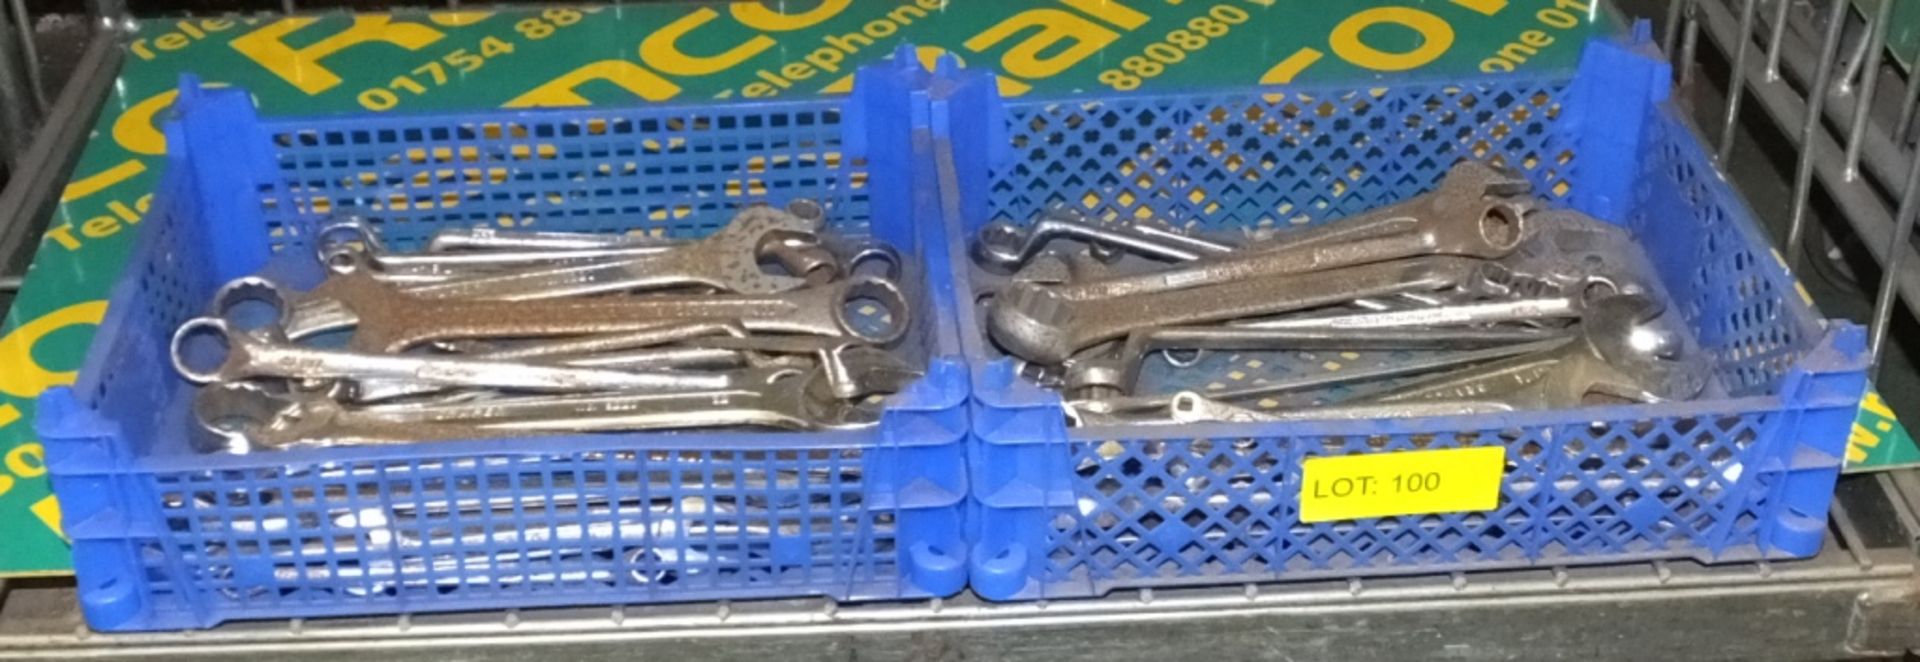 Used spanners